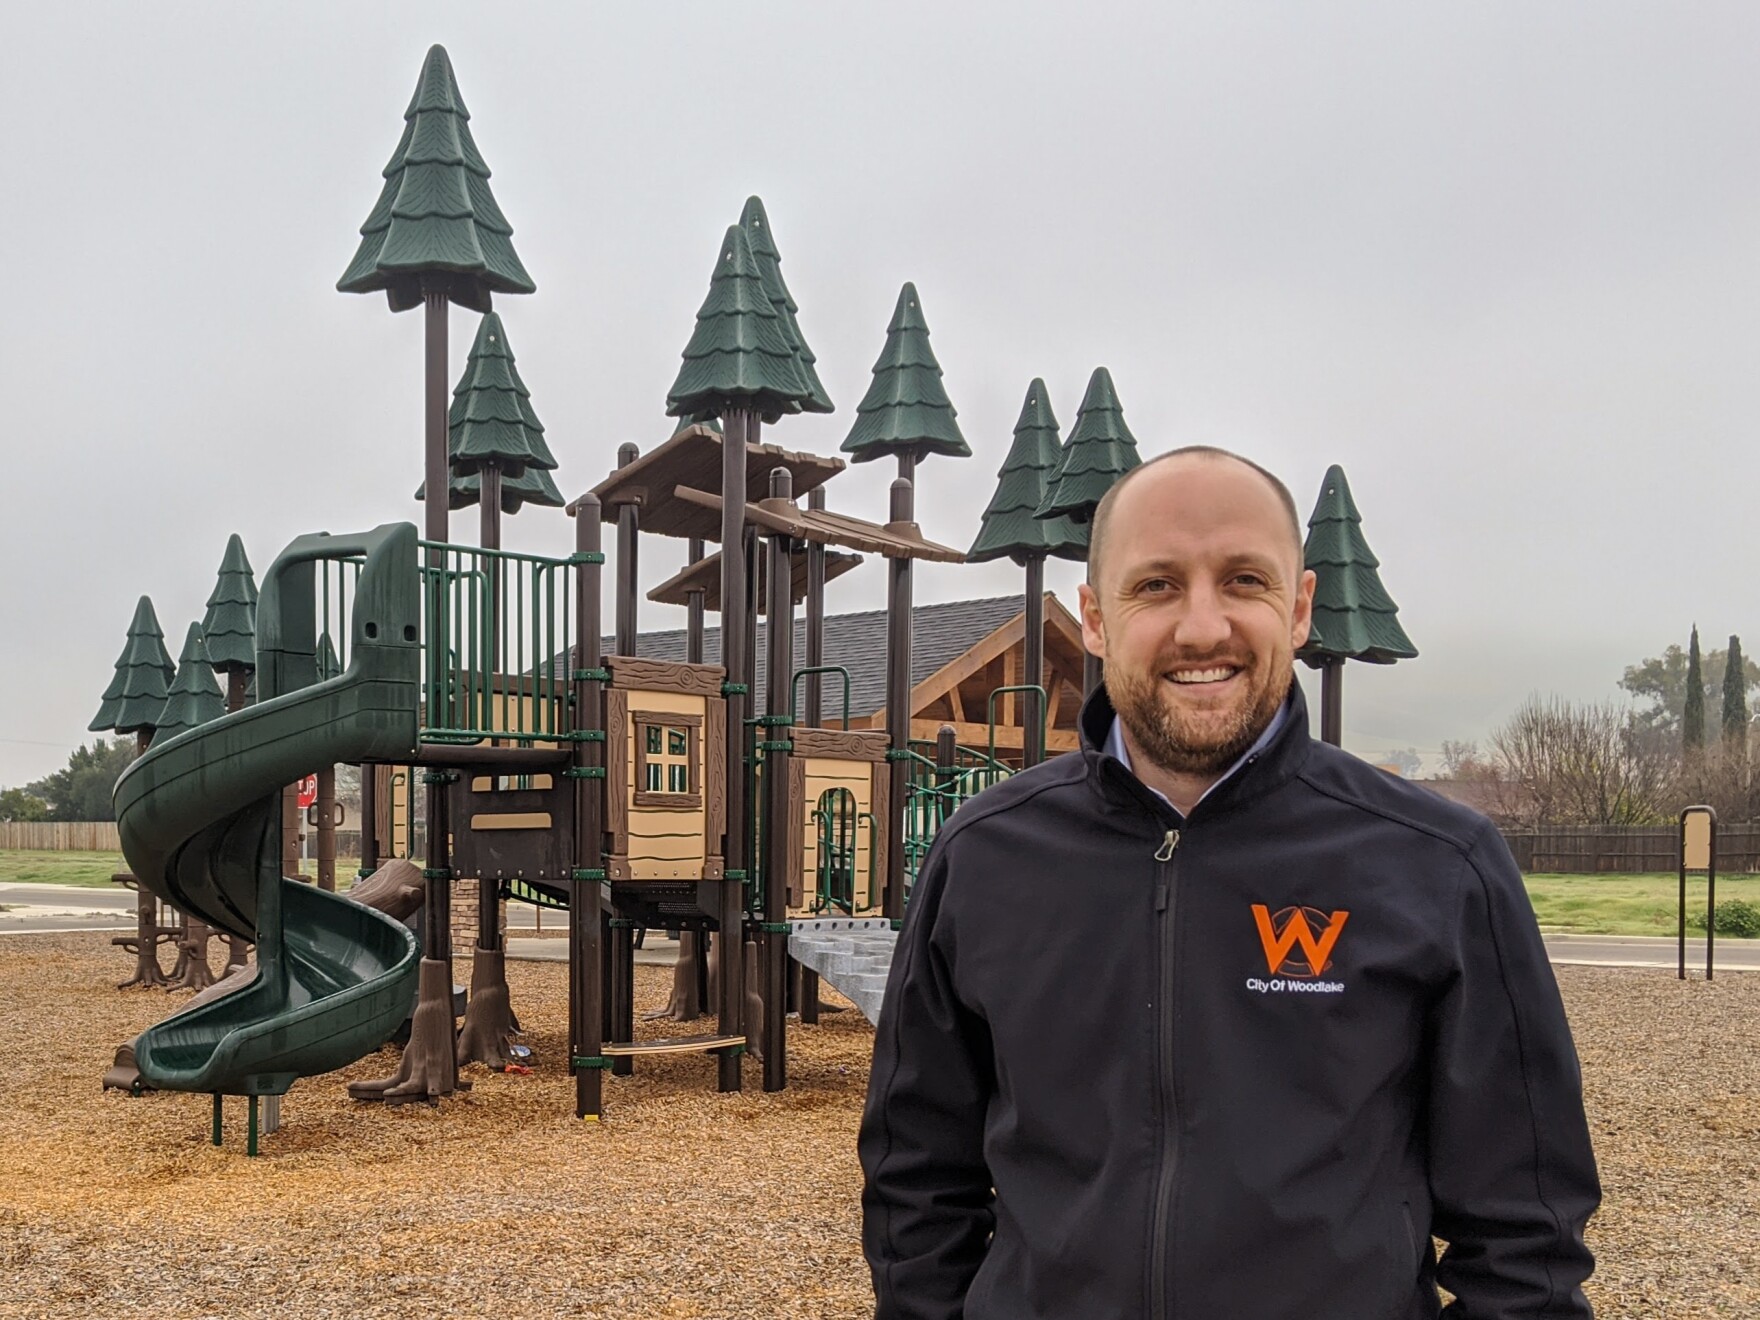 a smiling balding white man stands in front of a children's playground on an overcast day